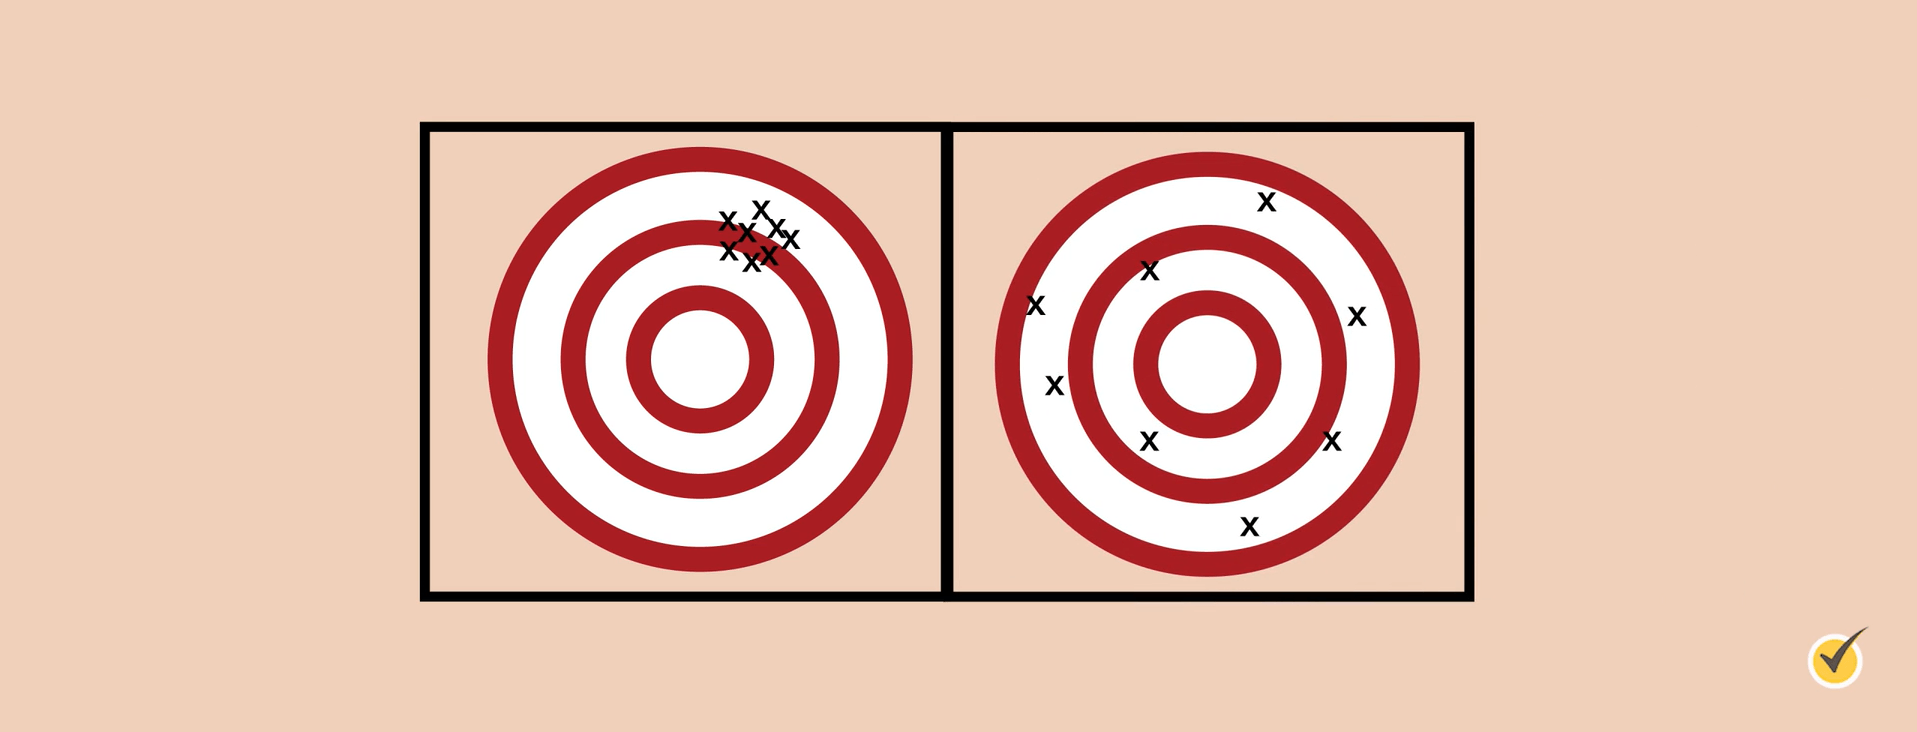 Image of 2 targets; one has a cluster of x's in the upper right corner representing precision, but not accuracy. The right target has scattered X's around the target representing inaccurate and imprecise hits. , 